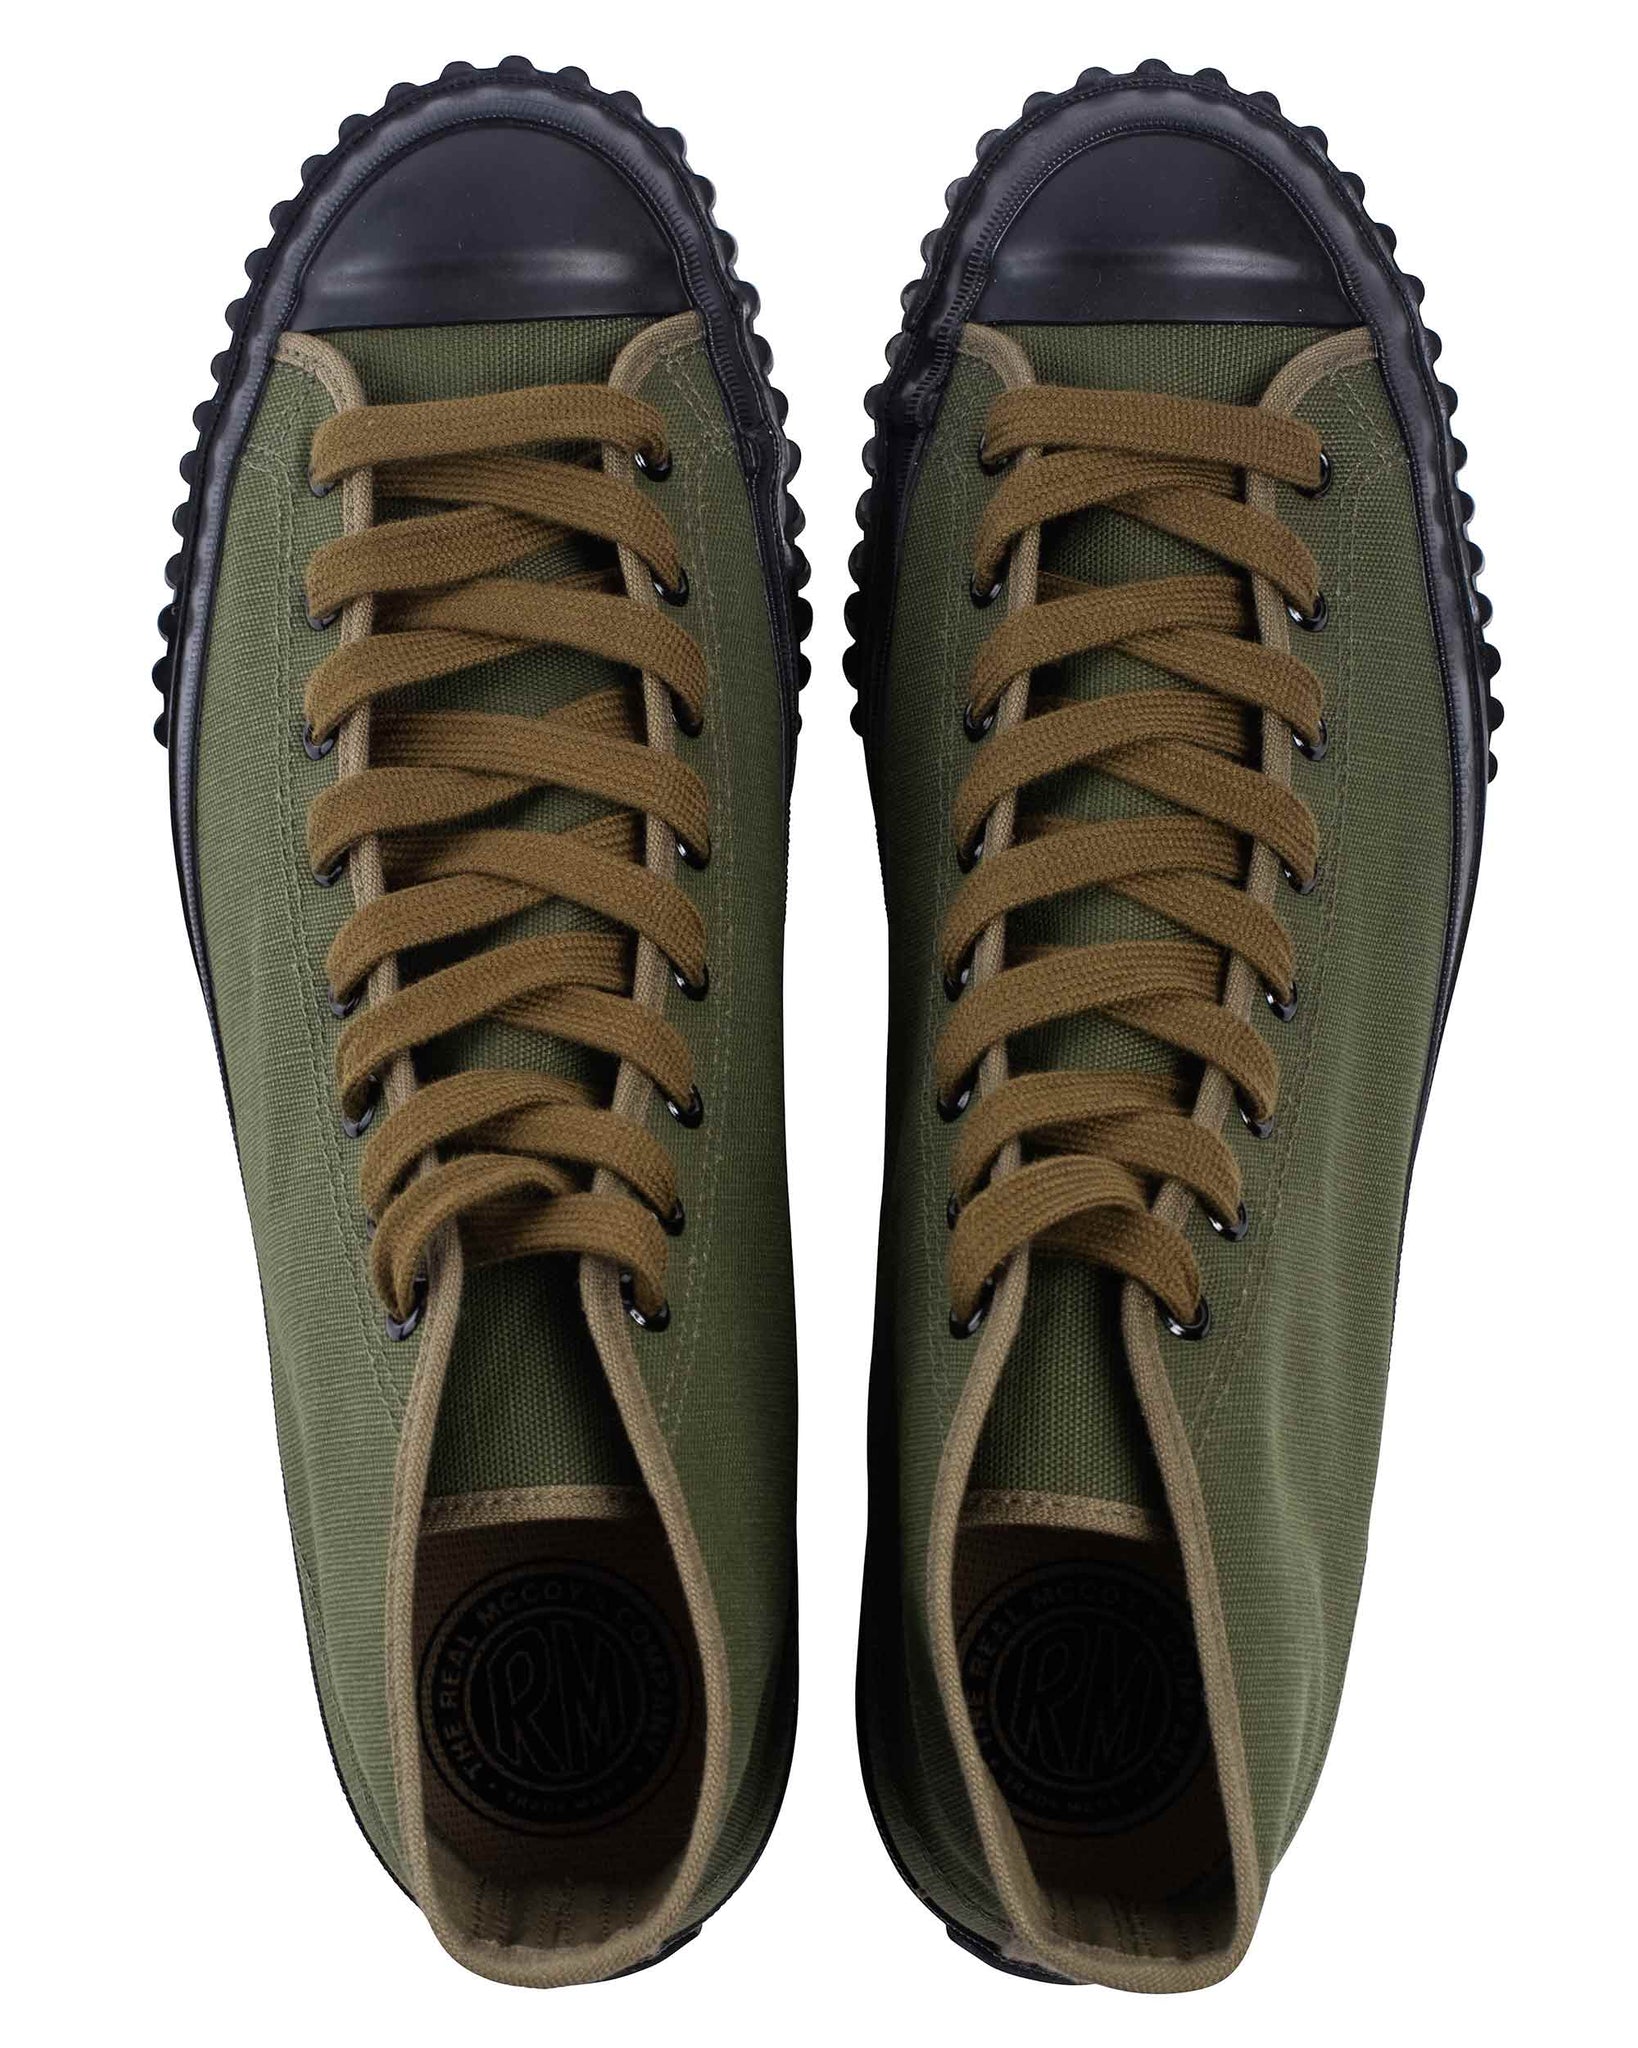 The Real McCoy's MA17010 Military Canvas Training Shoes Olive Top